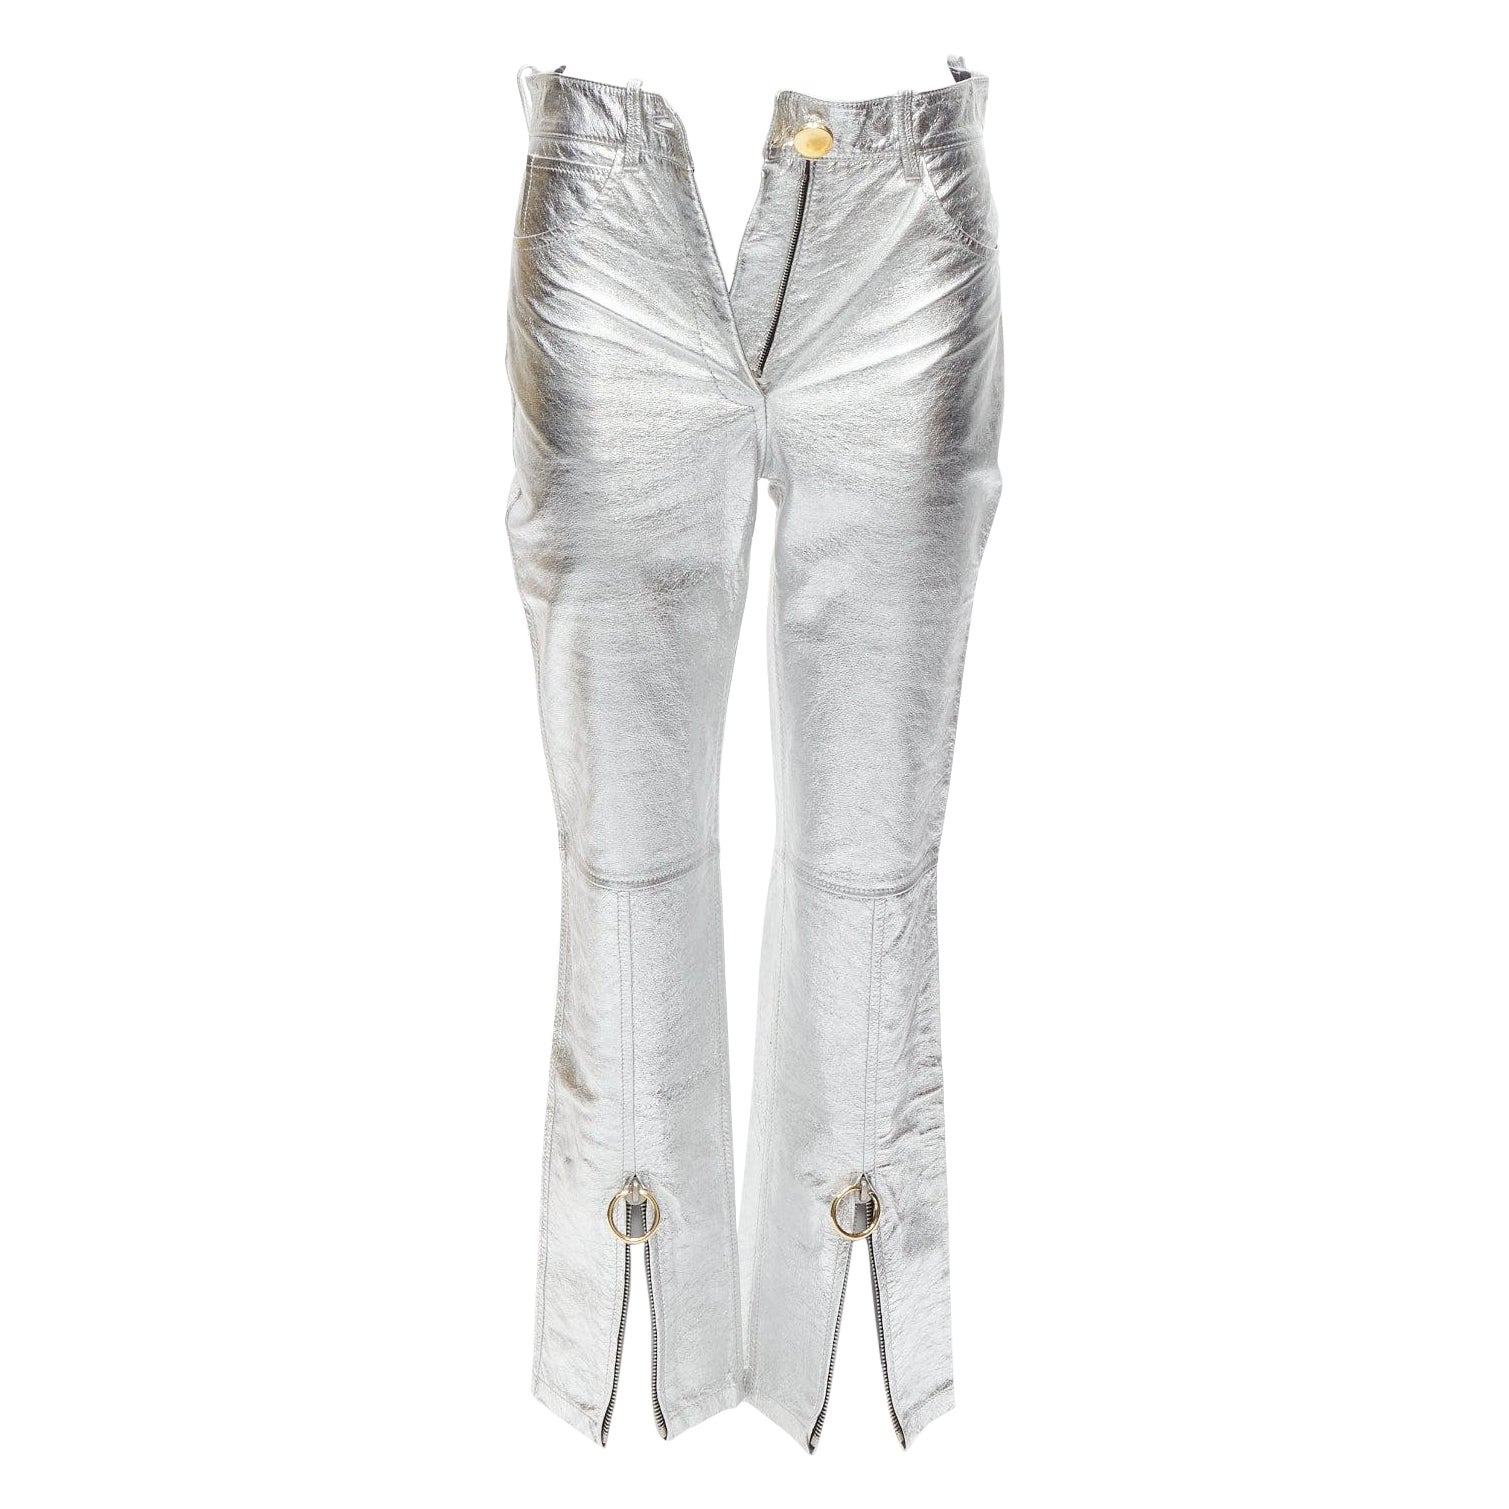 PETAR PETROV silver genuine leather gold ring zip moto pants FR36 S For Sale